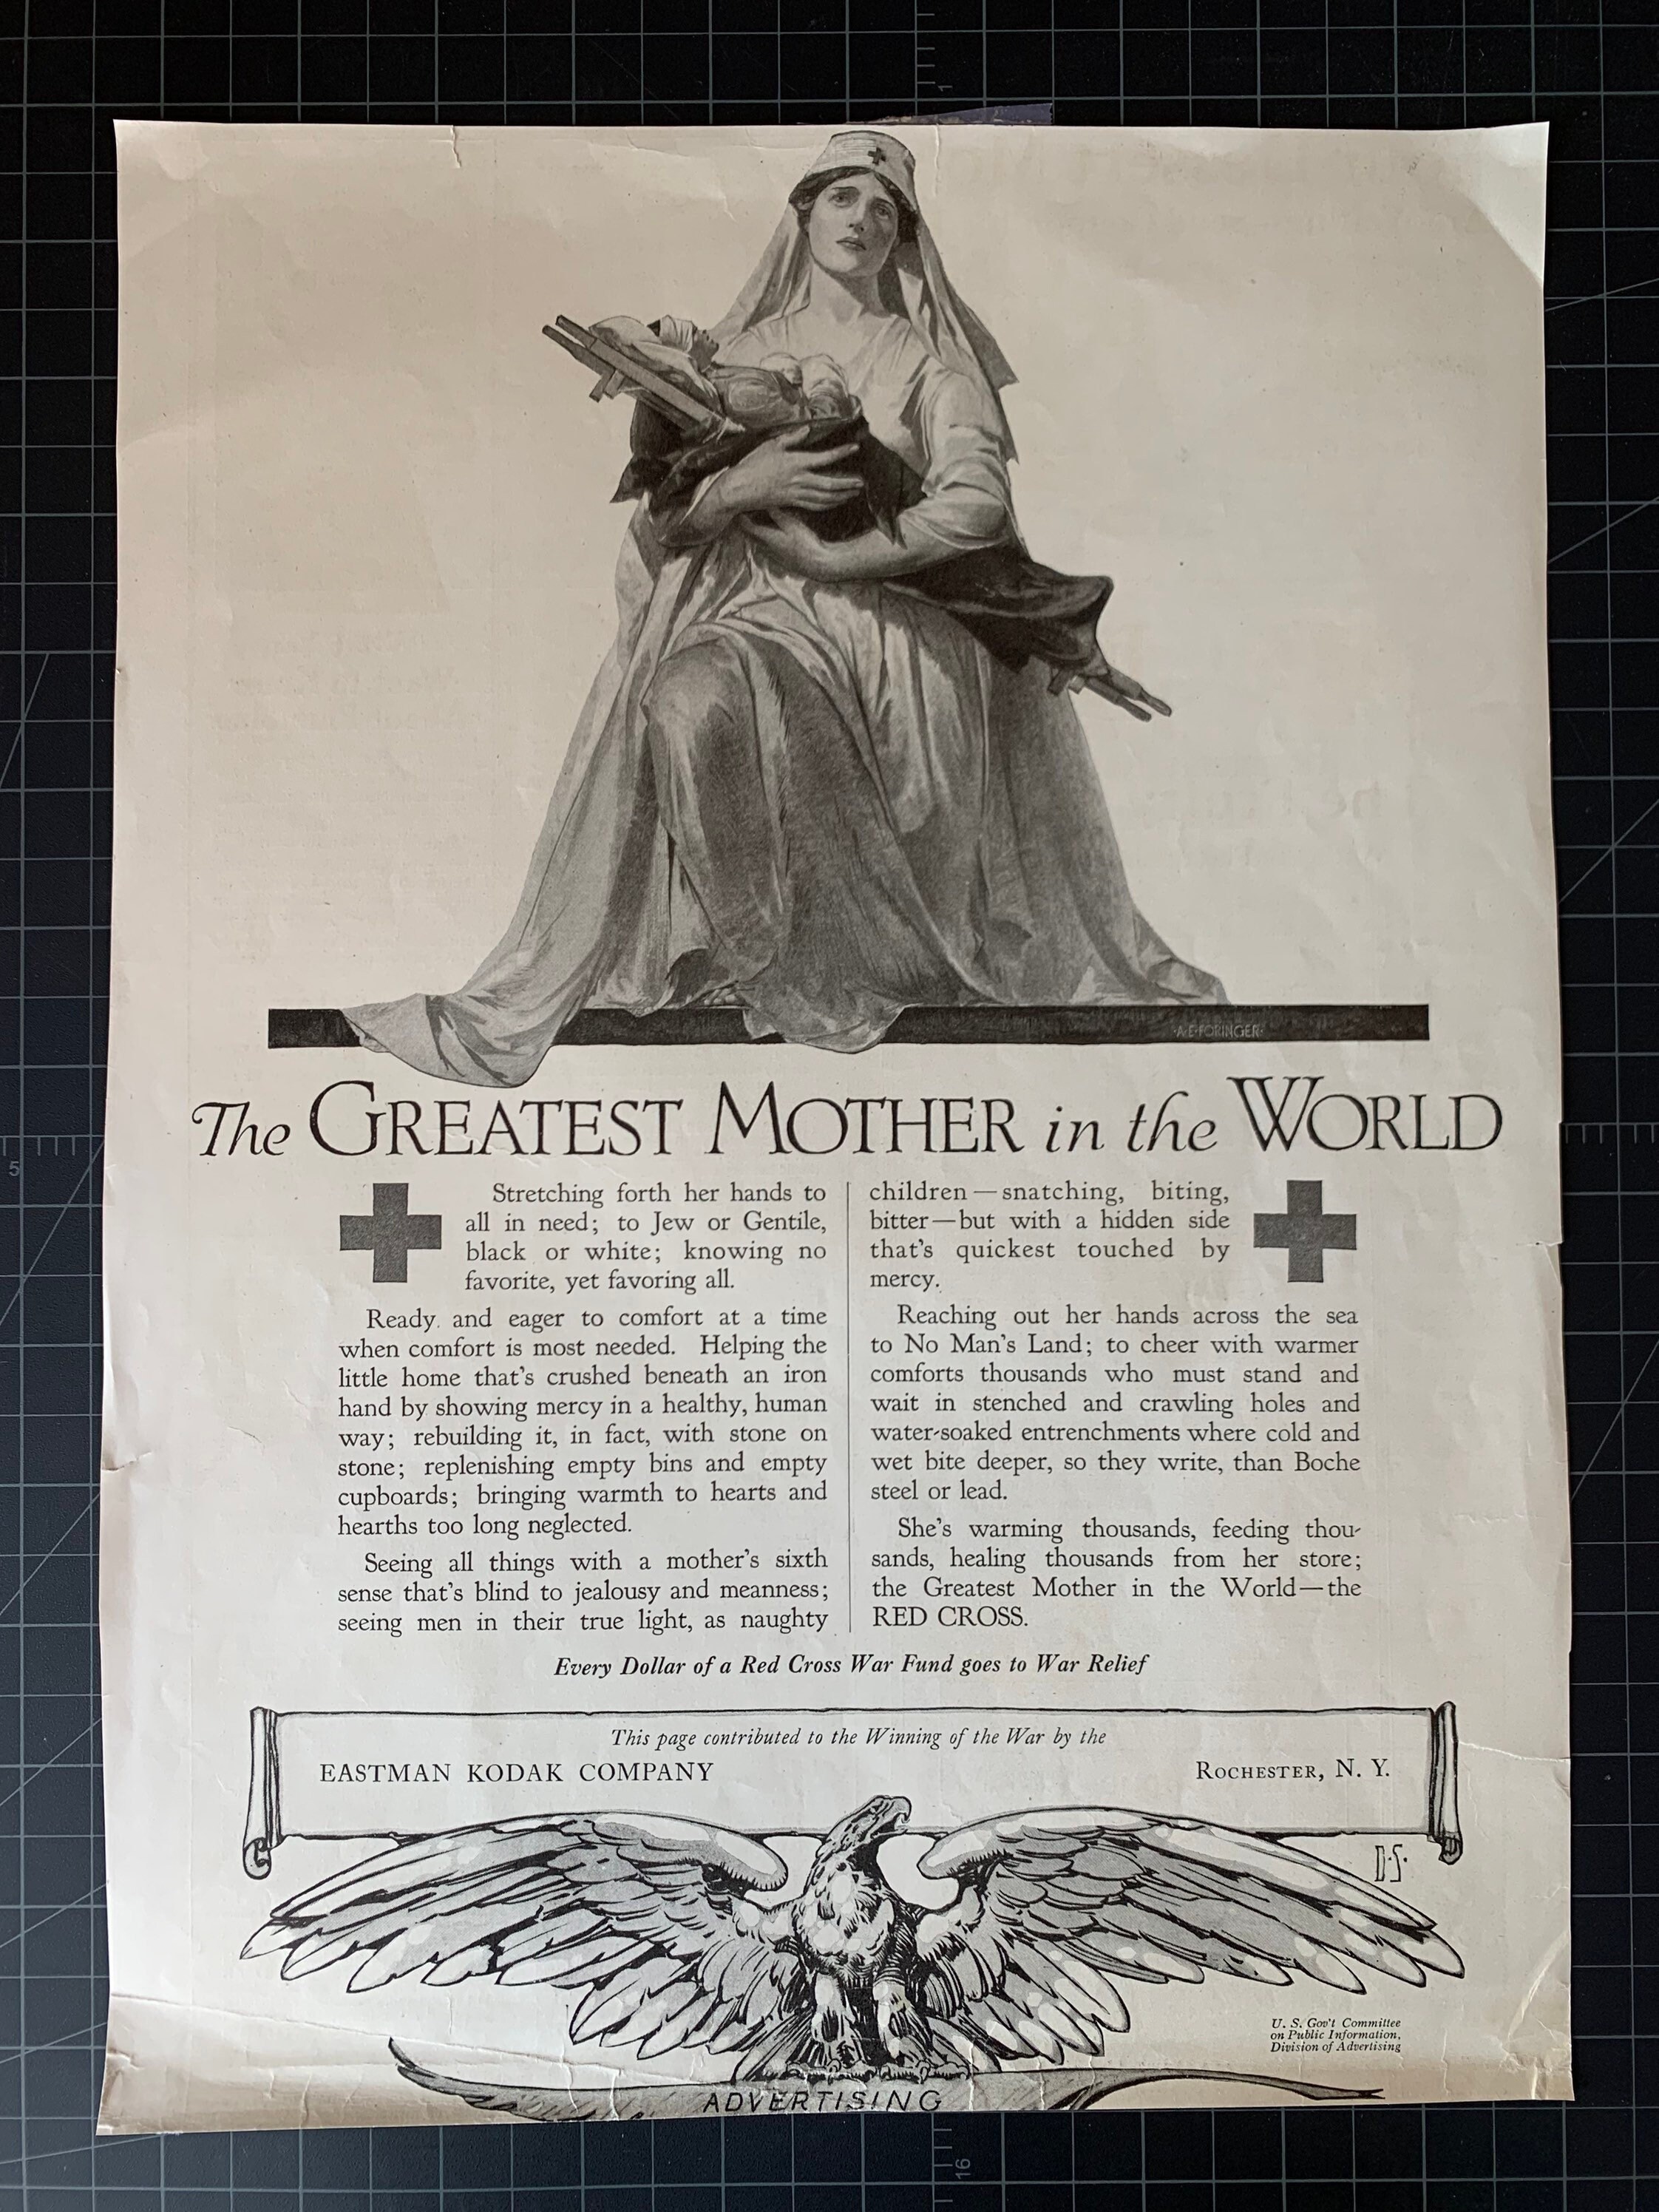 The greatest mother in the world / A. E. Foringer.